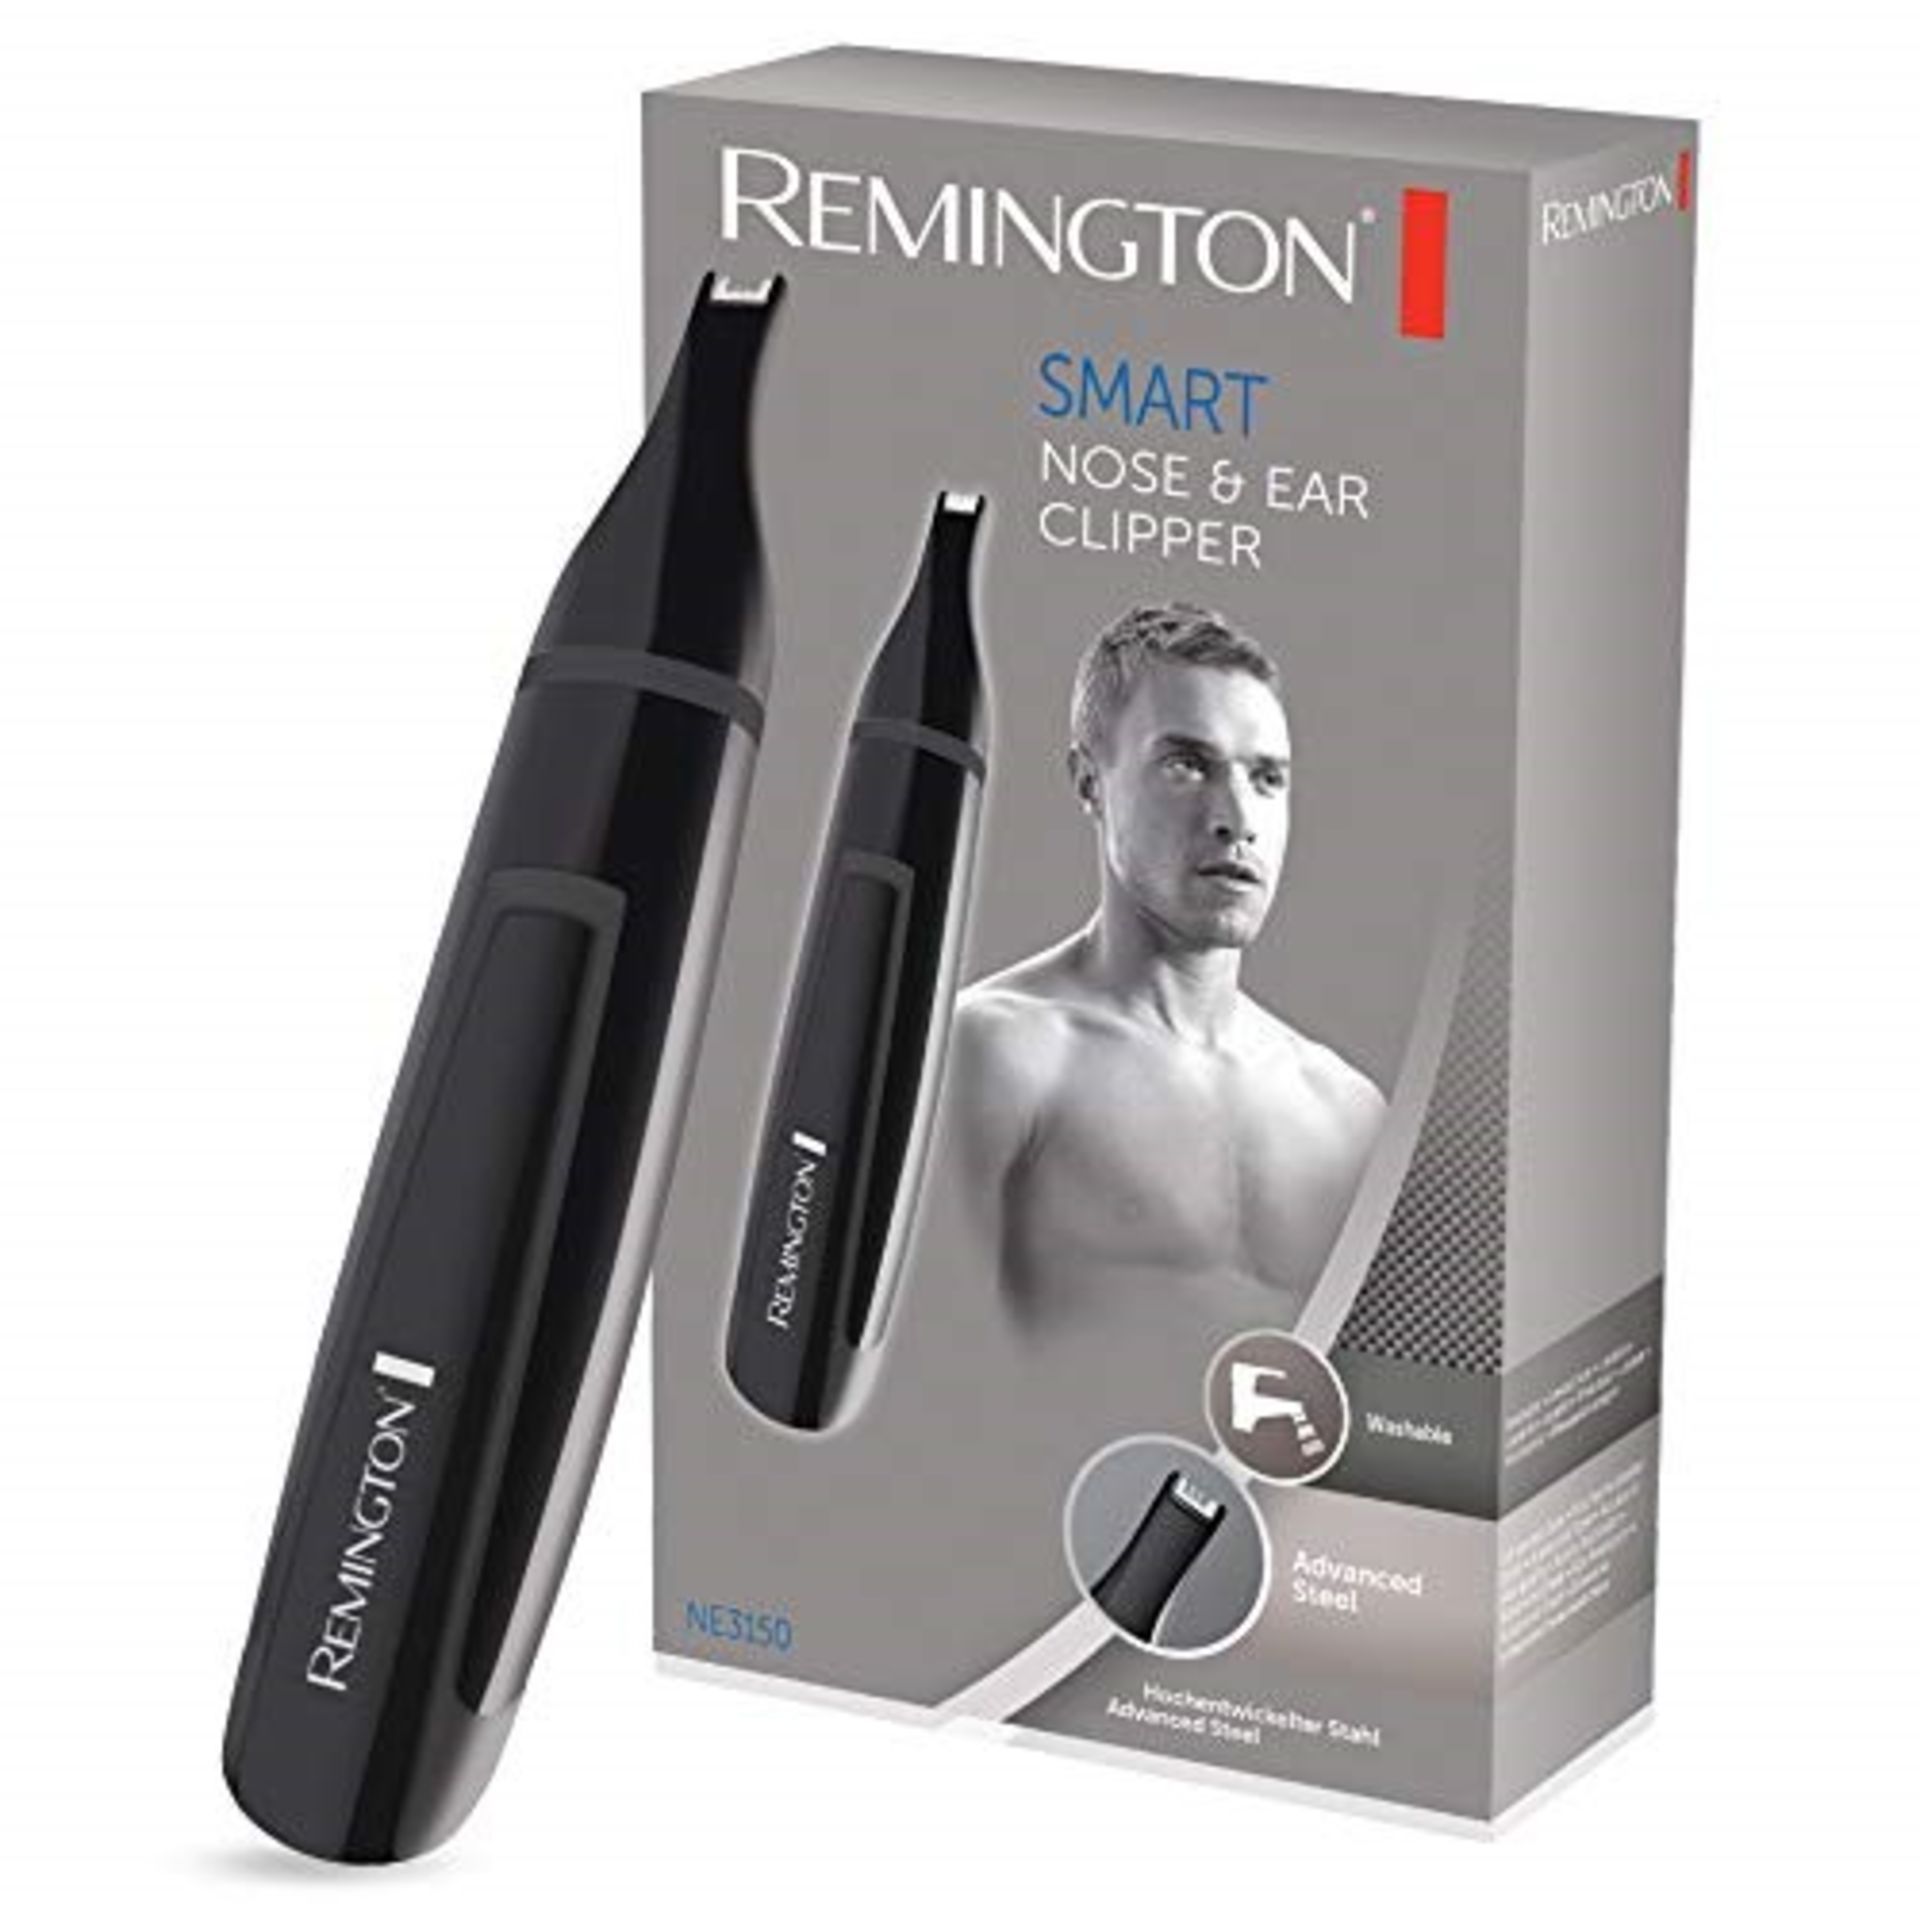 COMBINED RRP £119.00 LOT TO CONTAIN 8 ASSORTED Personal Care Appliances: Remington, Wahl, Nicky - Image 5 of 9